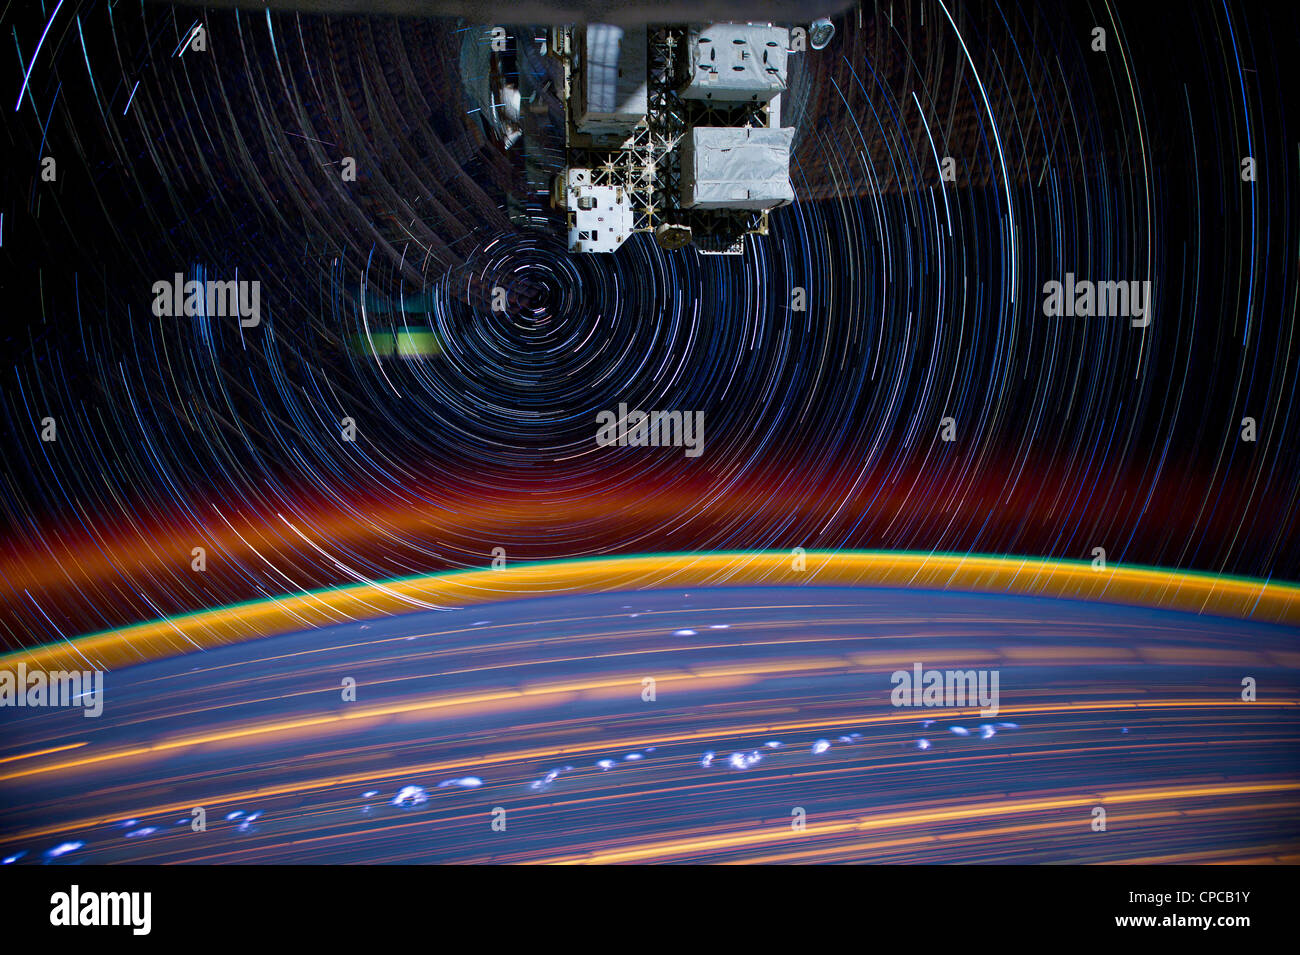 Composite series of images photographed from a mounted camera on the Earth-orbiting International Space Station showing star trails as they orbit 240-miles above Earth. A total of 18 images photographed by the astronaut-monitored stationary camera were combined to create this composite. Stock Photo